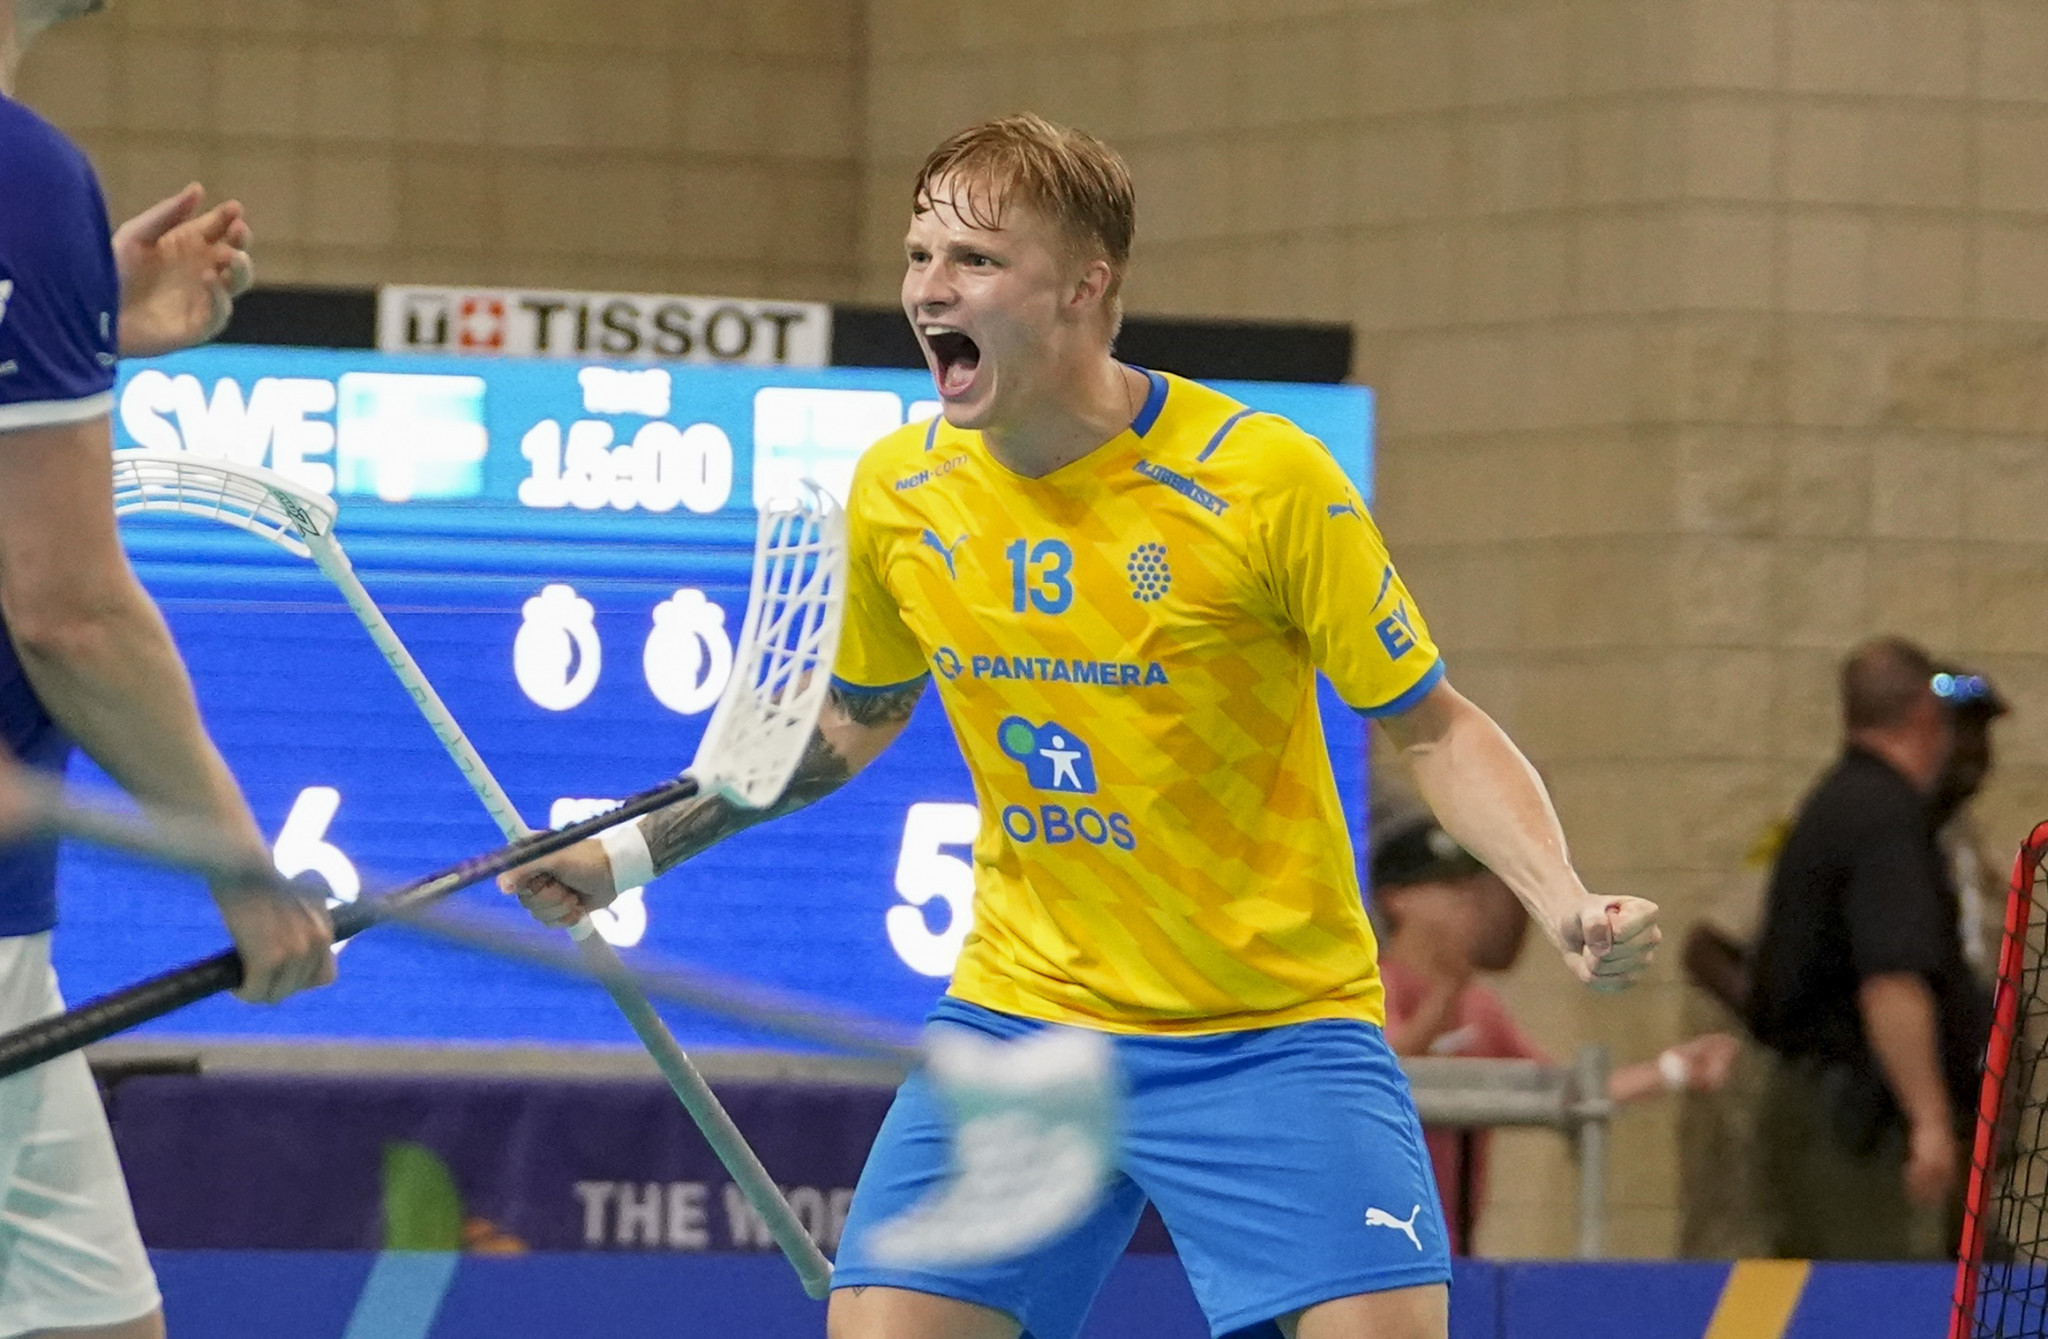 Ludwig Persson struck the decisive sixth goal for Sweden in their men's floorball final victory against Finland ©Marvin Gentry/The World Games 2022